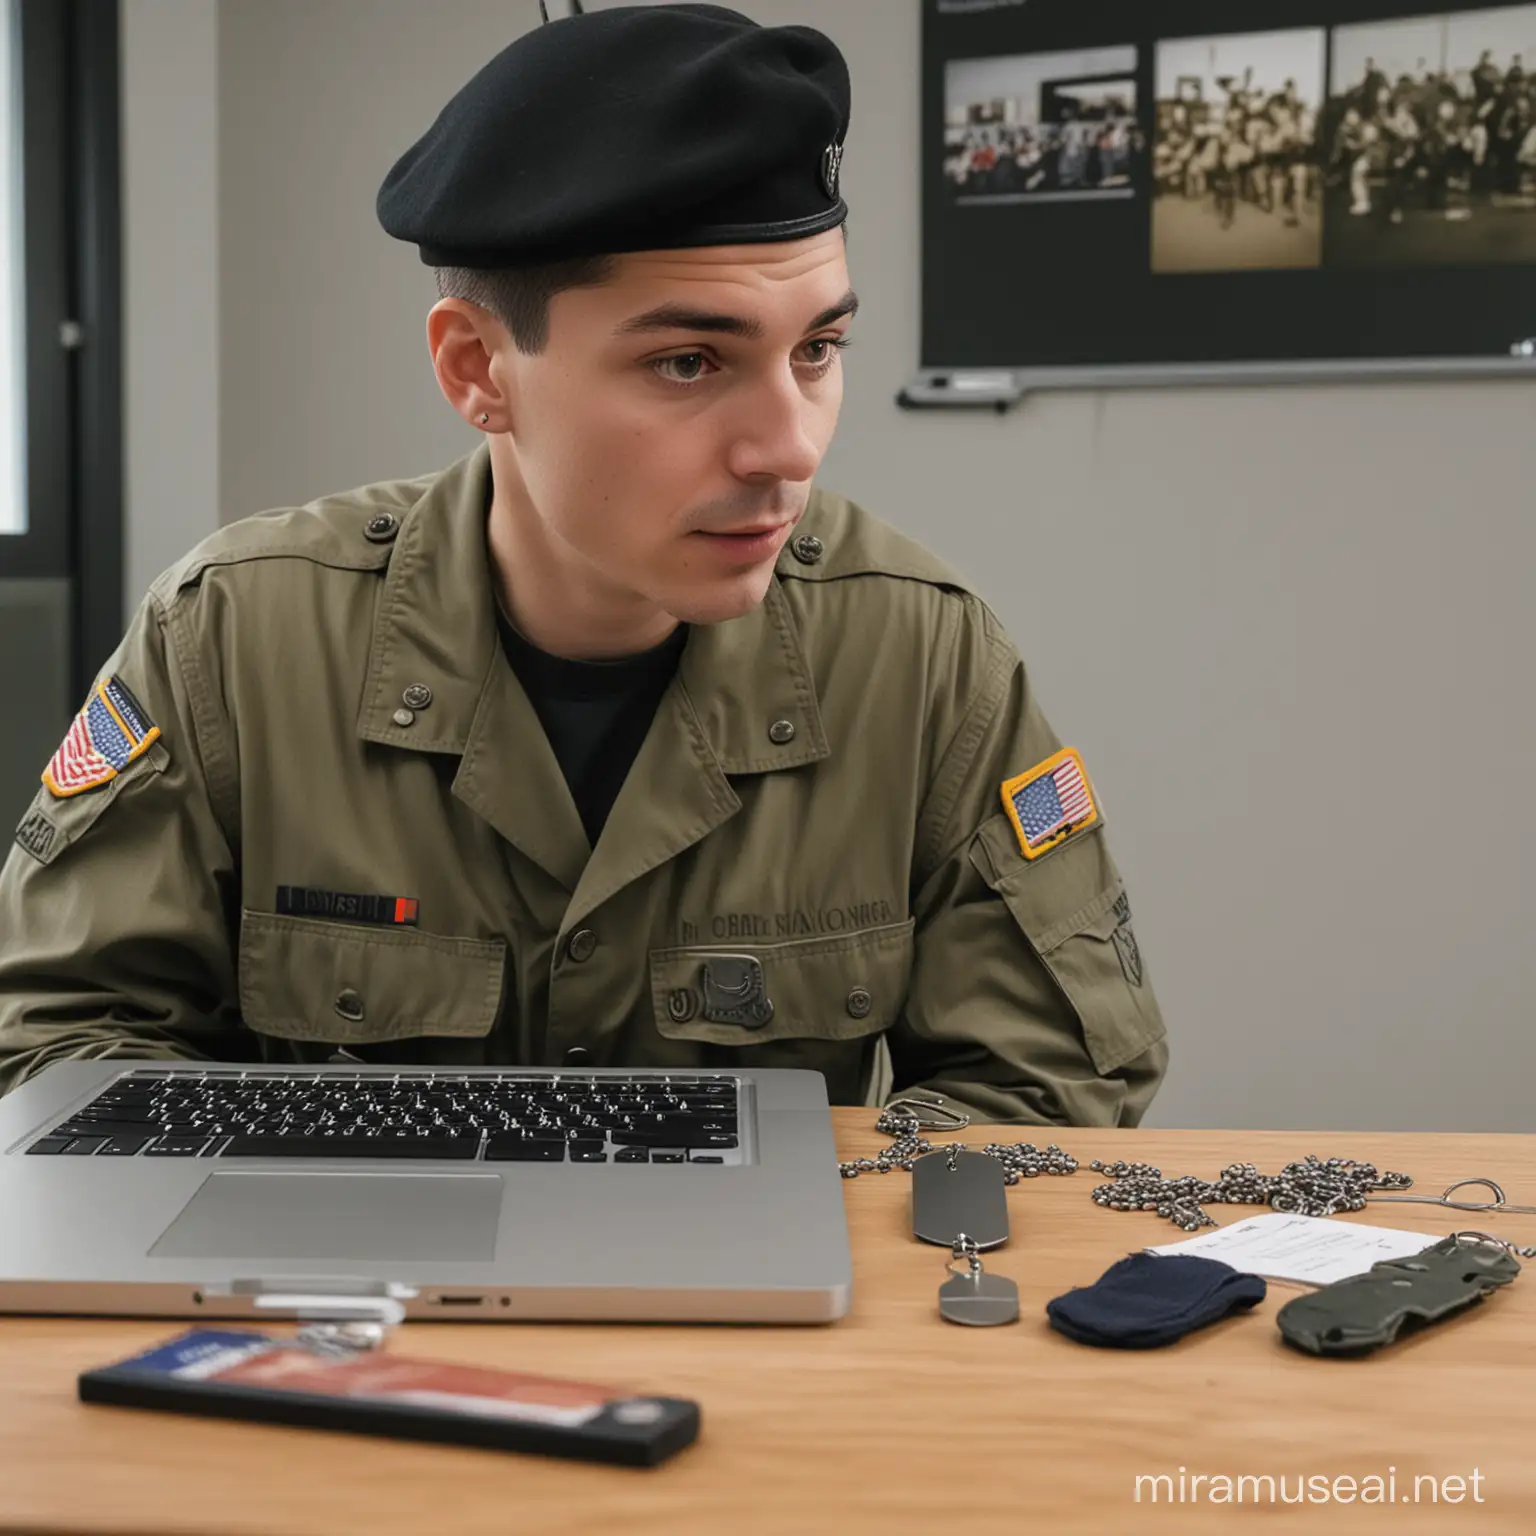 a split-screen photo. On one side, a crisp, focused image of military gear (like dog tags, a beret, or uniform details) and on the other, the same person in civilian attire, confidently working on a laptop or presenting in a meeting room. This visual metaphor highlights the transition from military life to entrepreneurship, embodying the post's message of transformation and potential.